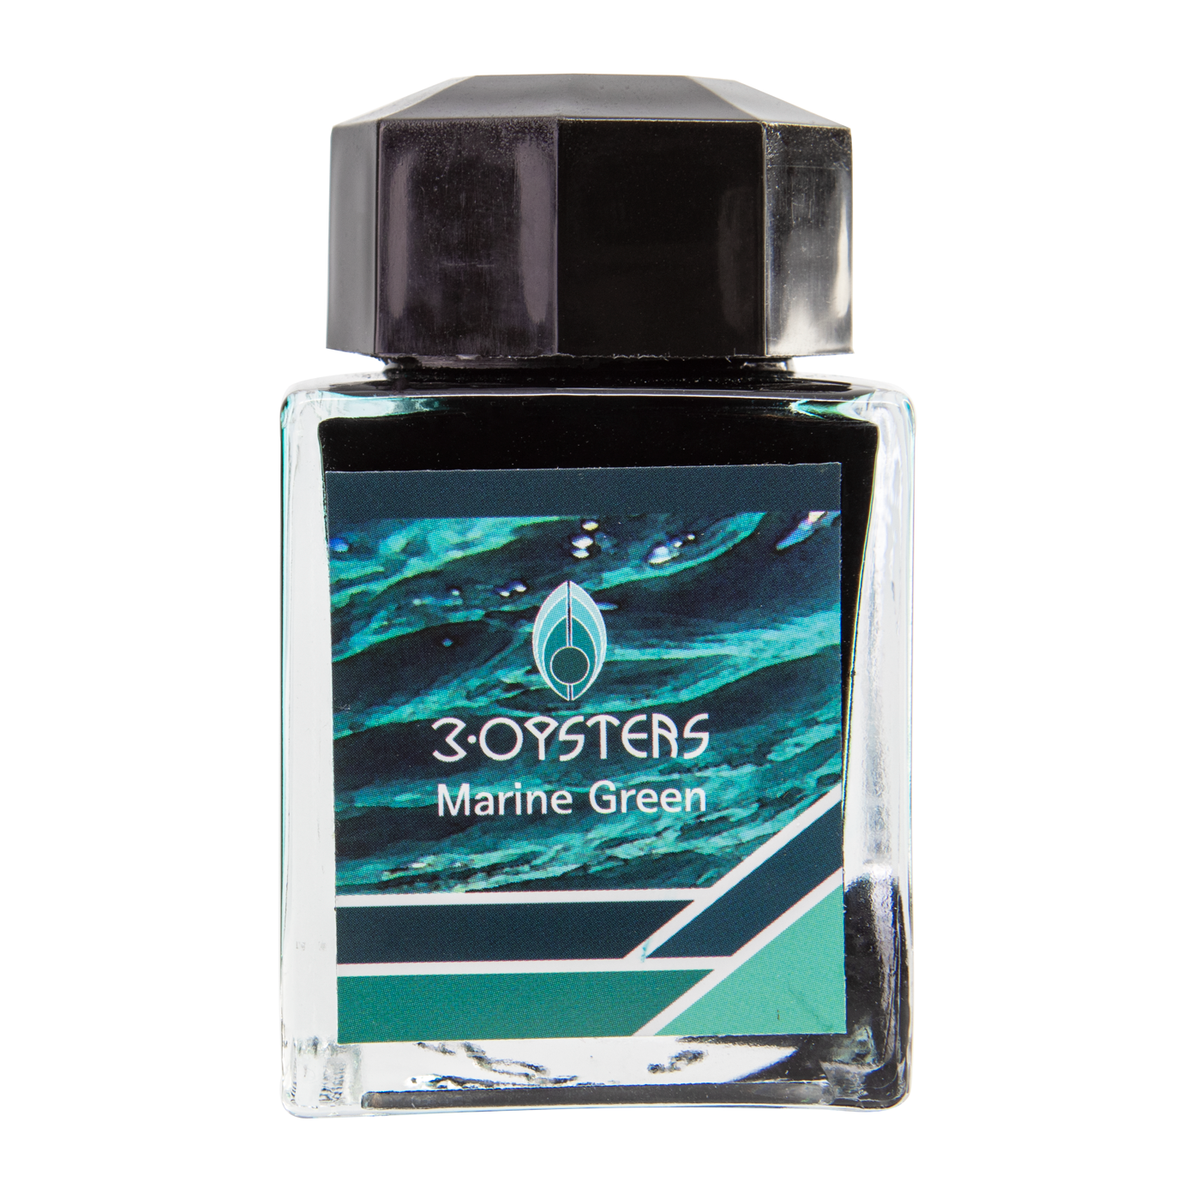 3Oysters Special Edition Marine Green